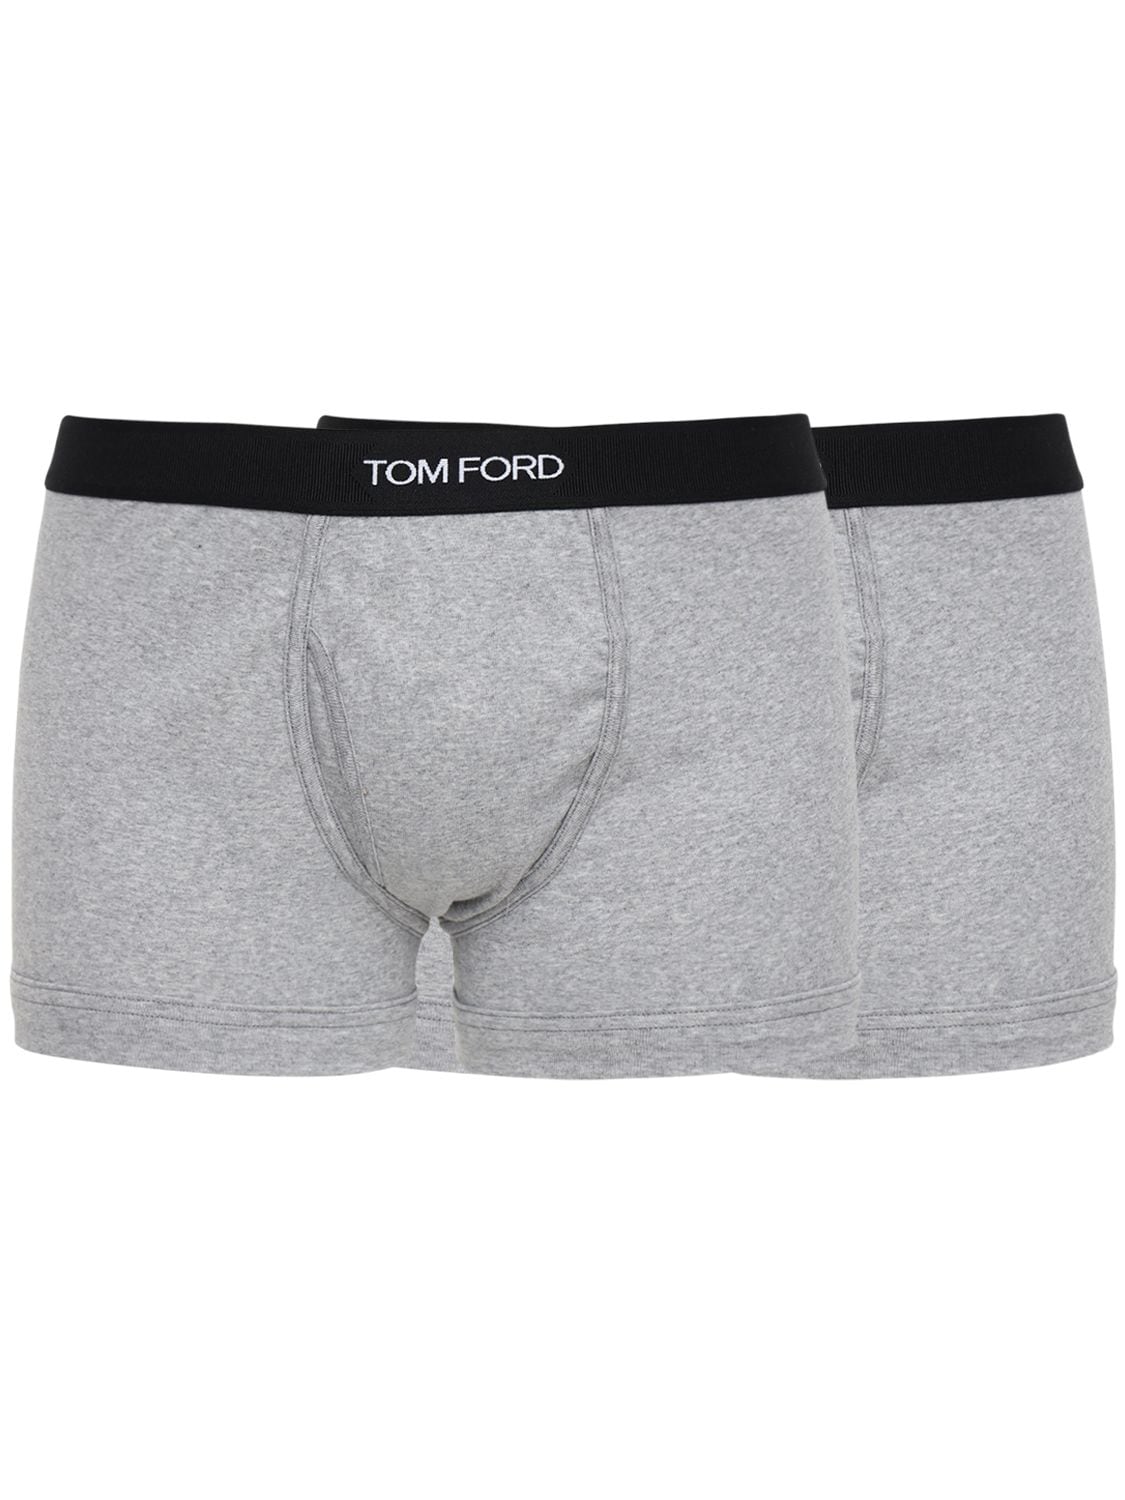 TOM FORD Pack Of 2 Logo Cotton Boxer Briefs